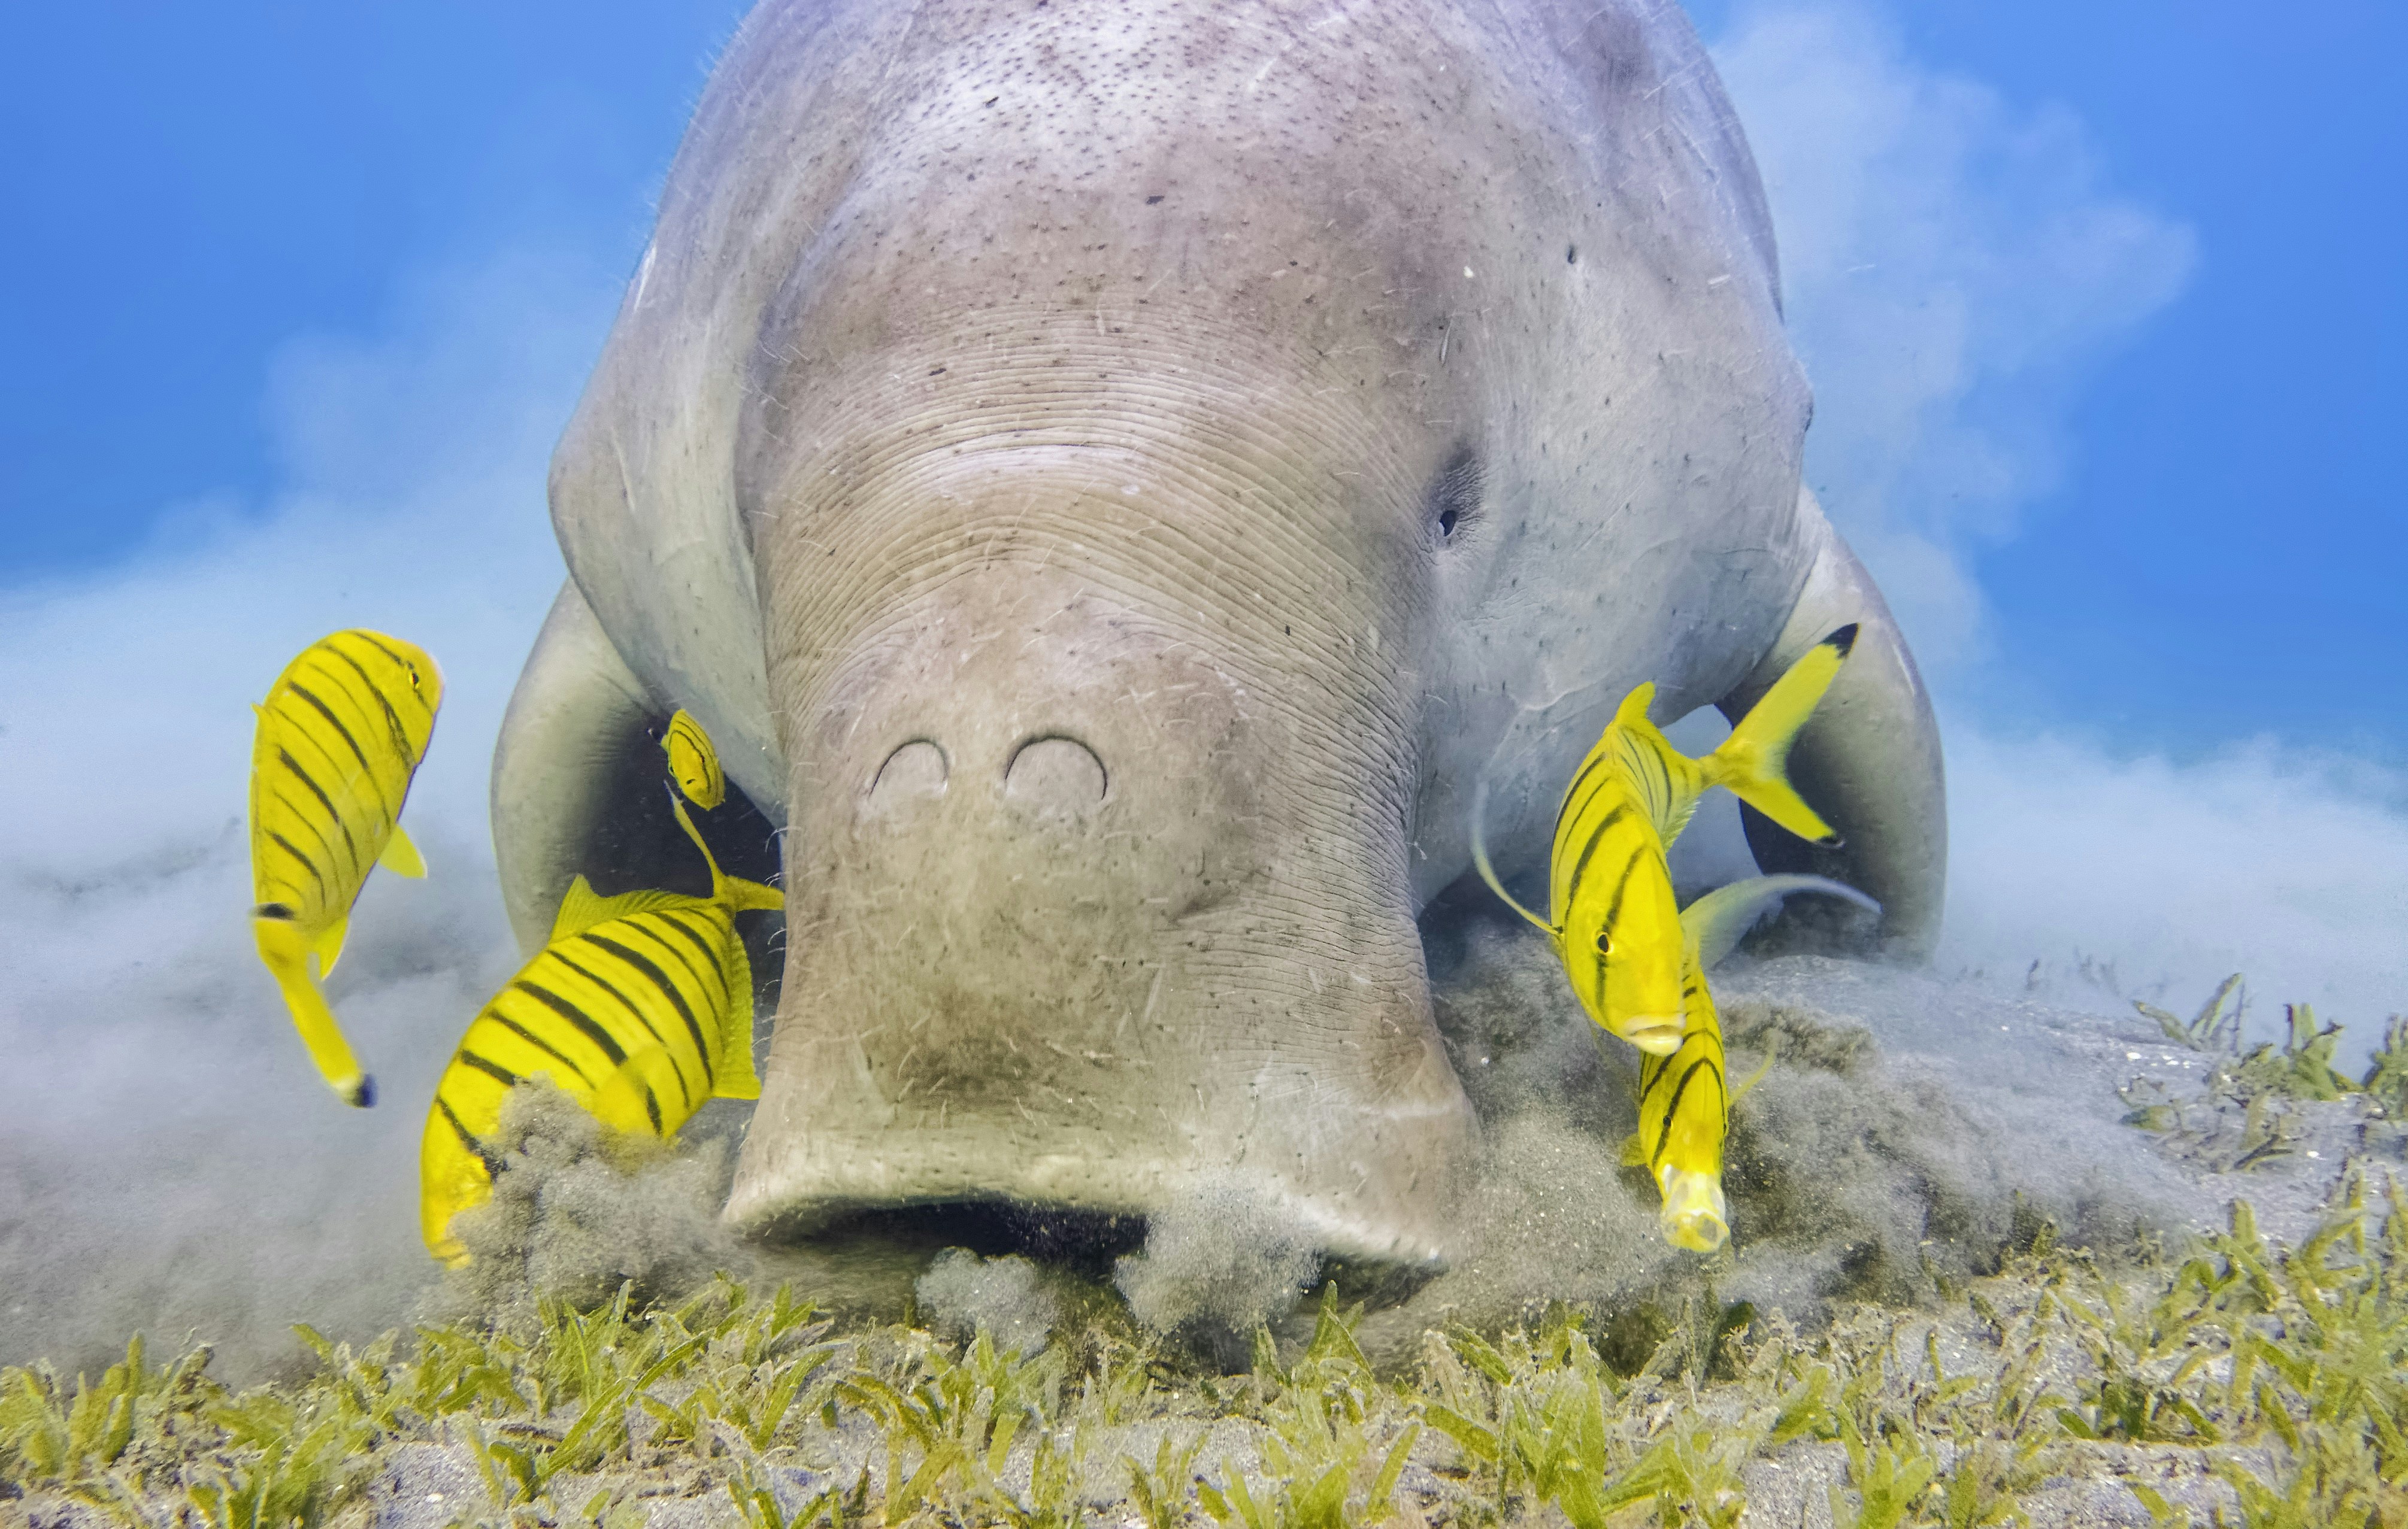 A dugong swimming along the seabed in the shallow waters of Marsa Alam, Egypt. The dugong is a medium-sized marine mammal, that is long and grey, with a dorsal fin, flippers and large snout.